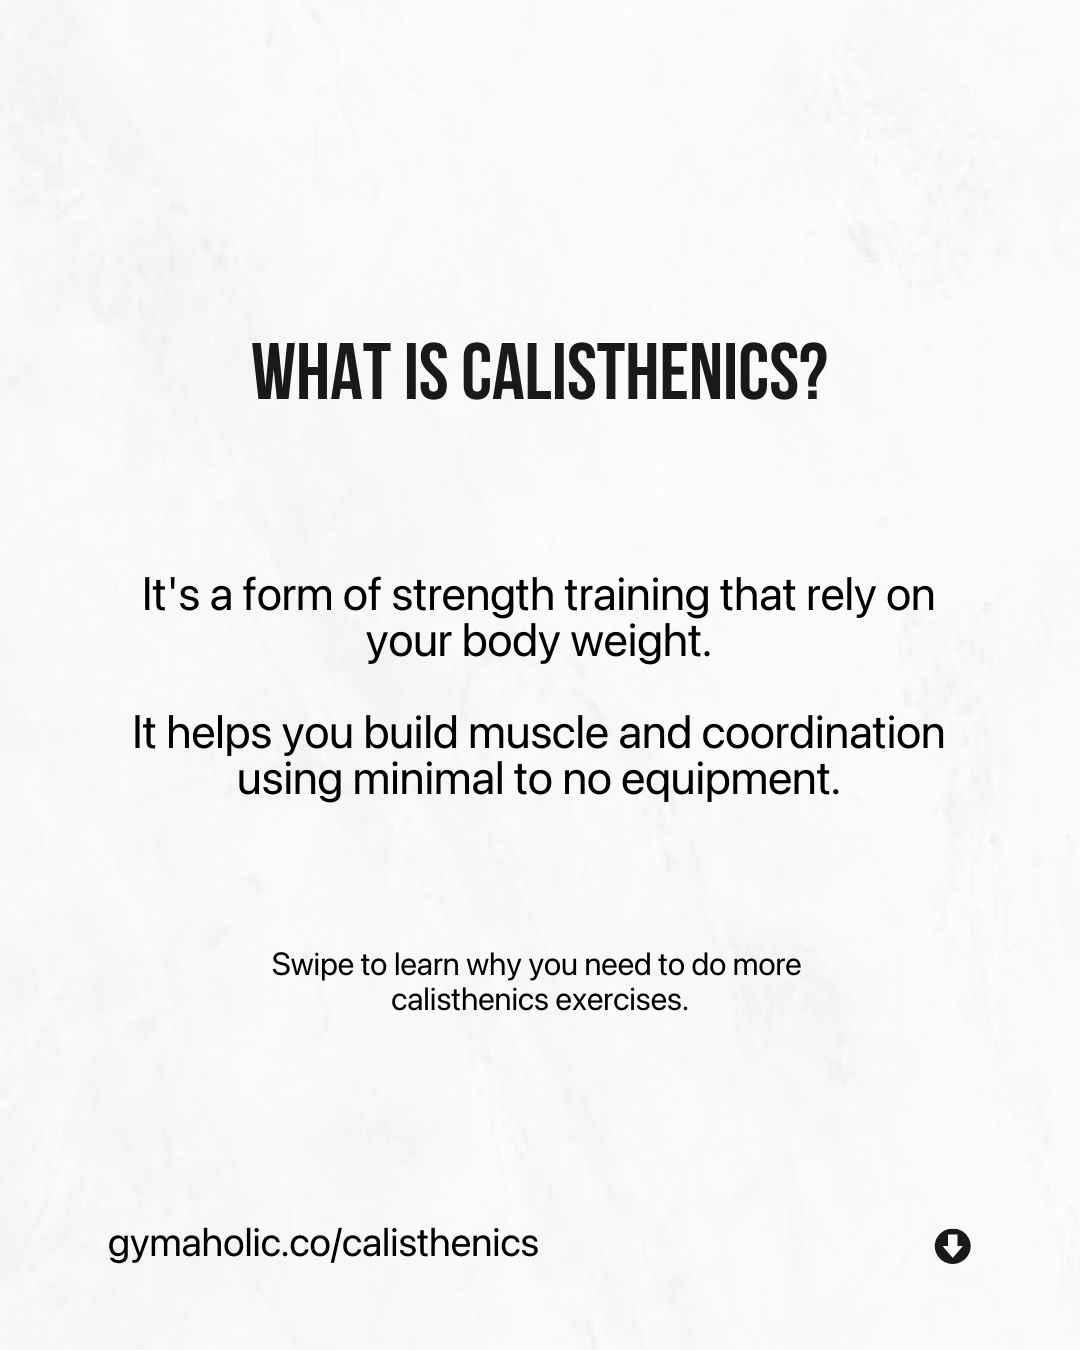 9 Reasons Why You Need To Do More Calisthenics Exercises